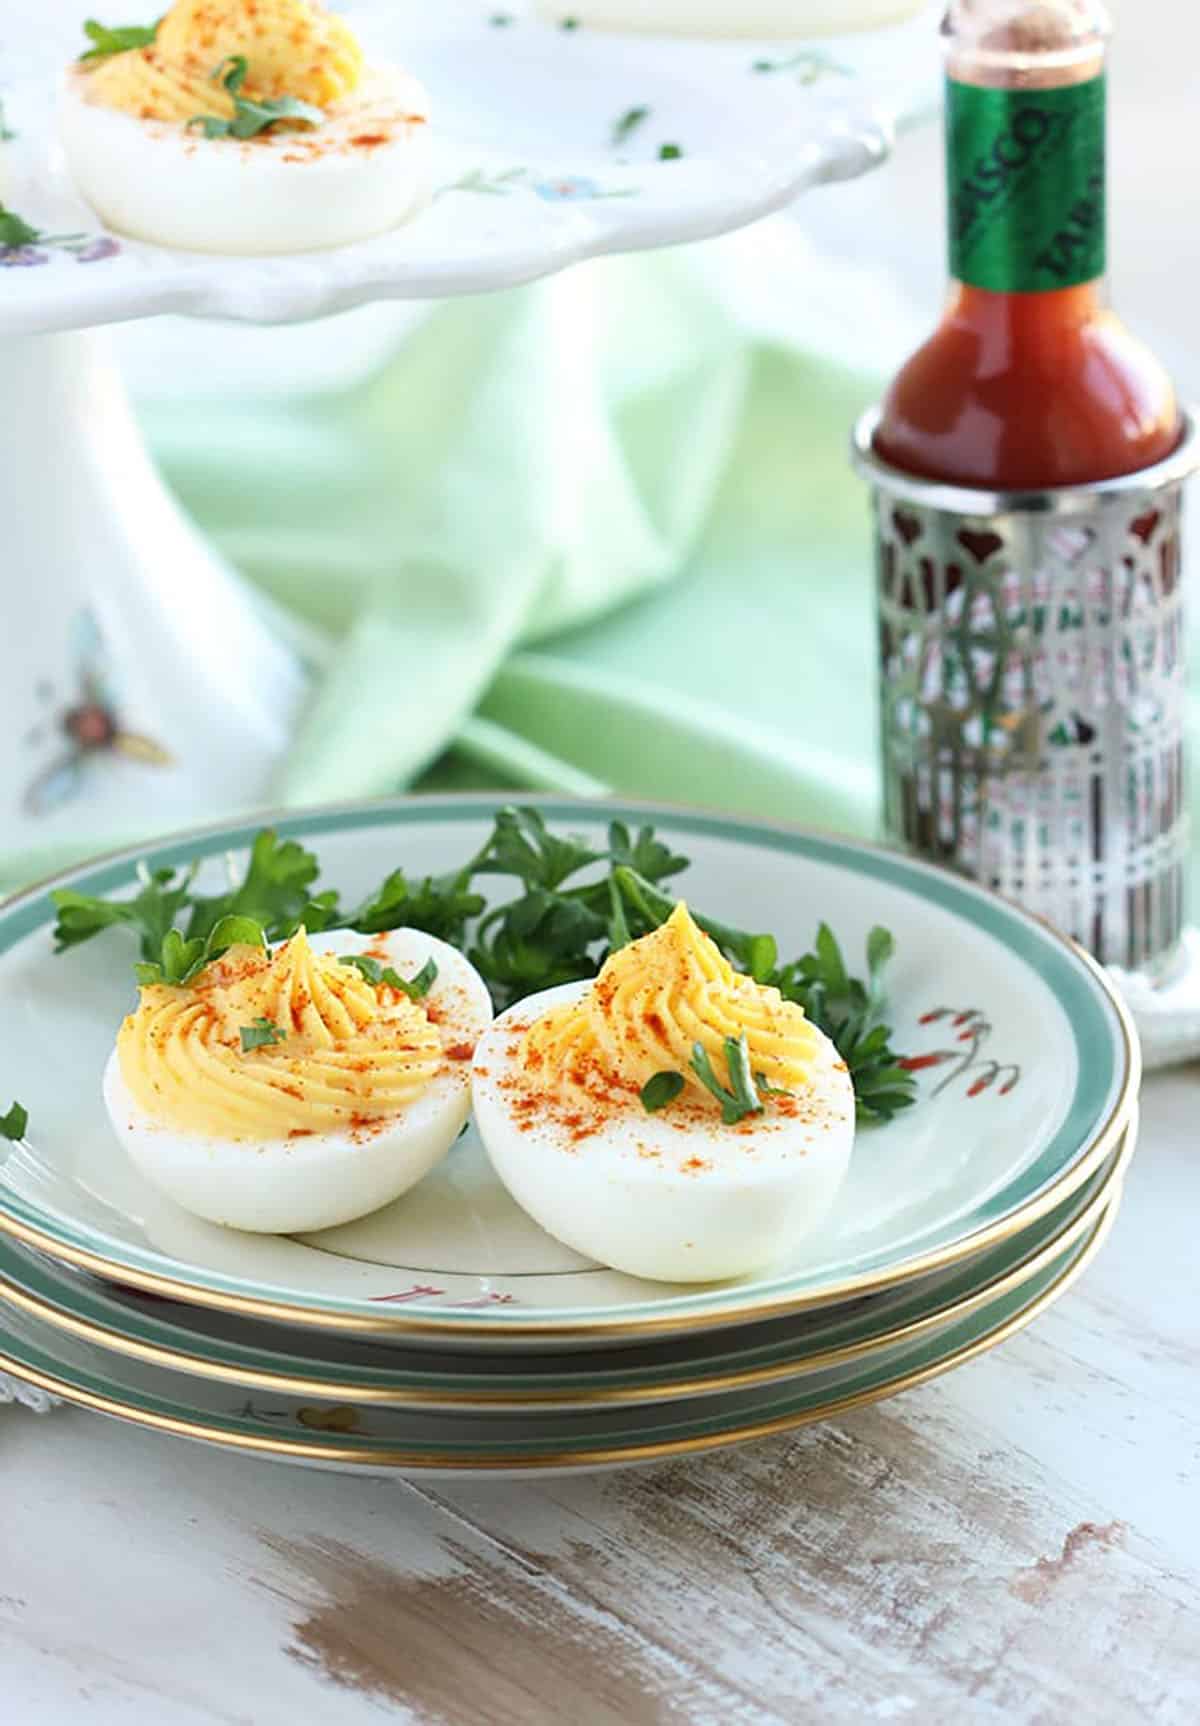 Two deviled eggs on a pile of plates with a bottle of hot sauce in a silver holder.